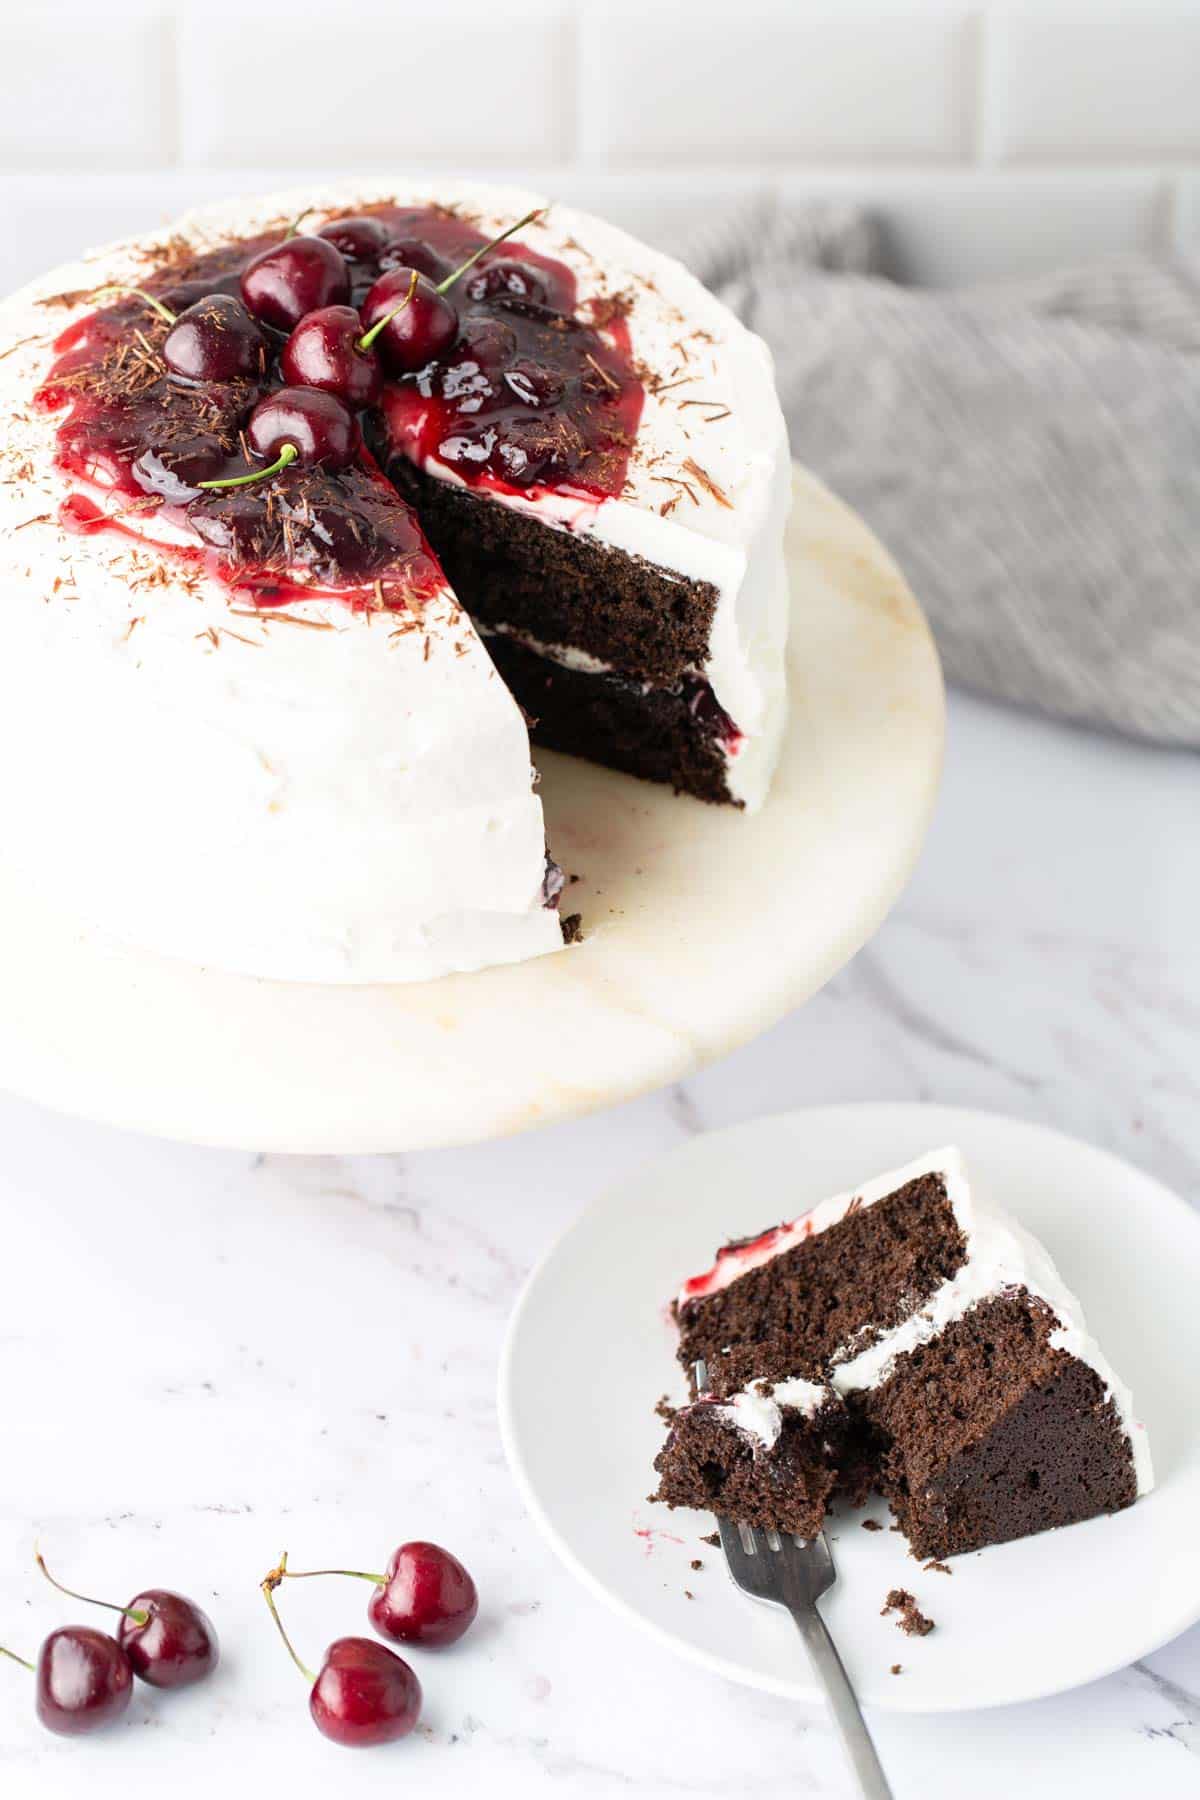 Chocolate cake with cherry topping and white frosting on a marble stand, with a slice cut out and served on a plate next to it. Fresh cherries are placed on and beside the cake.